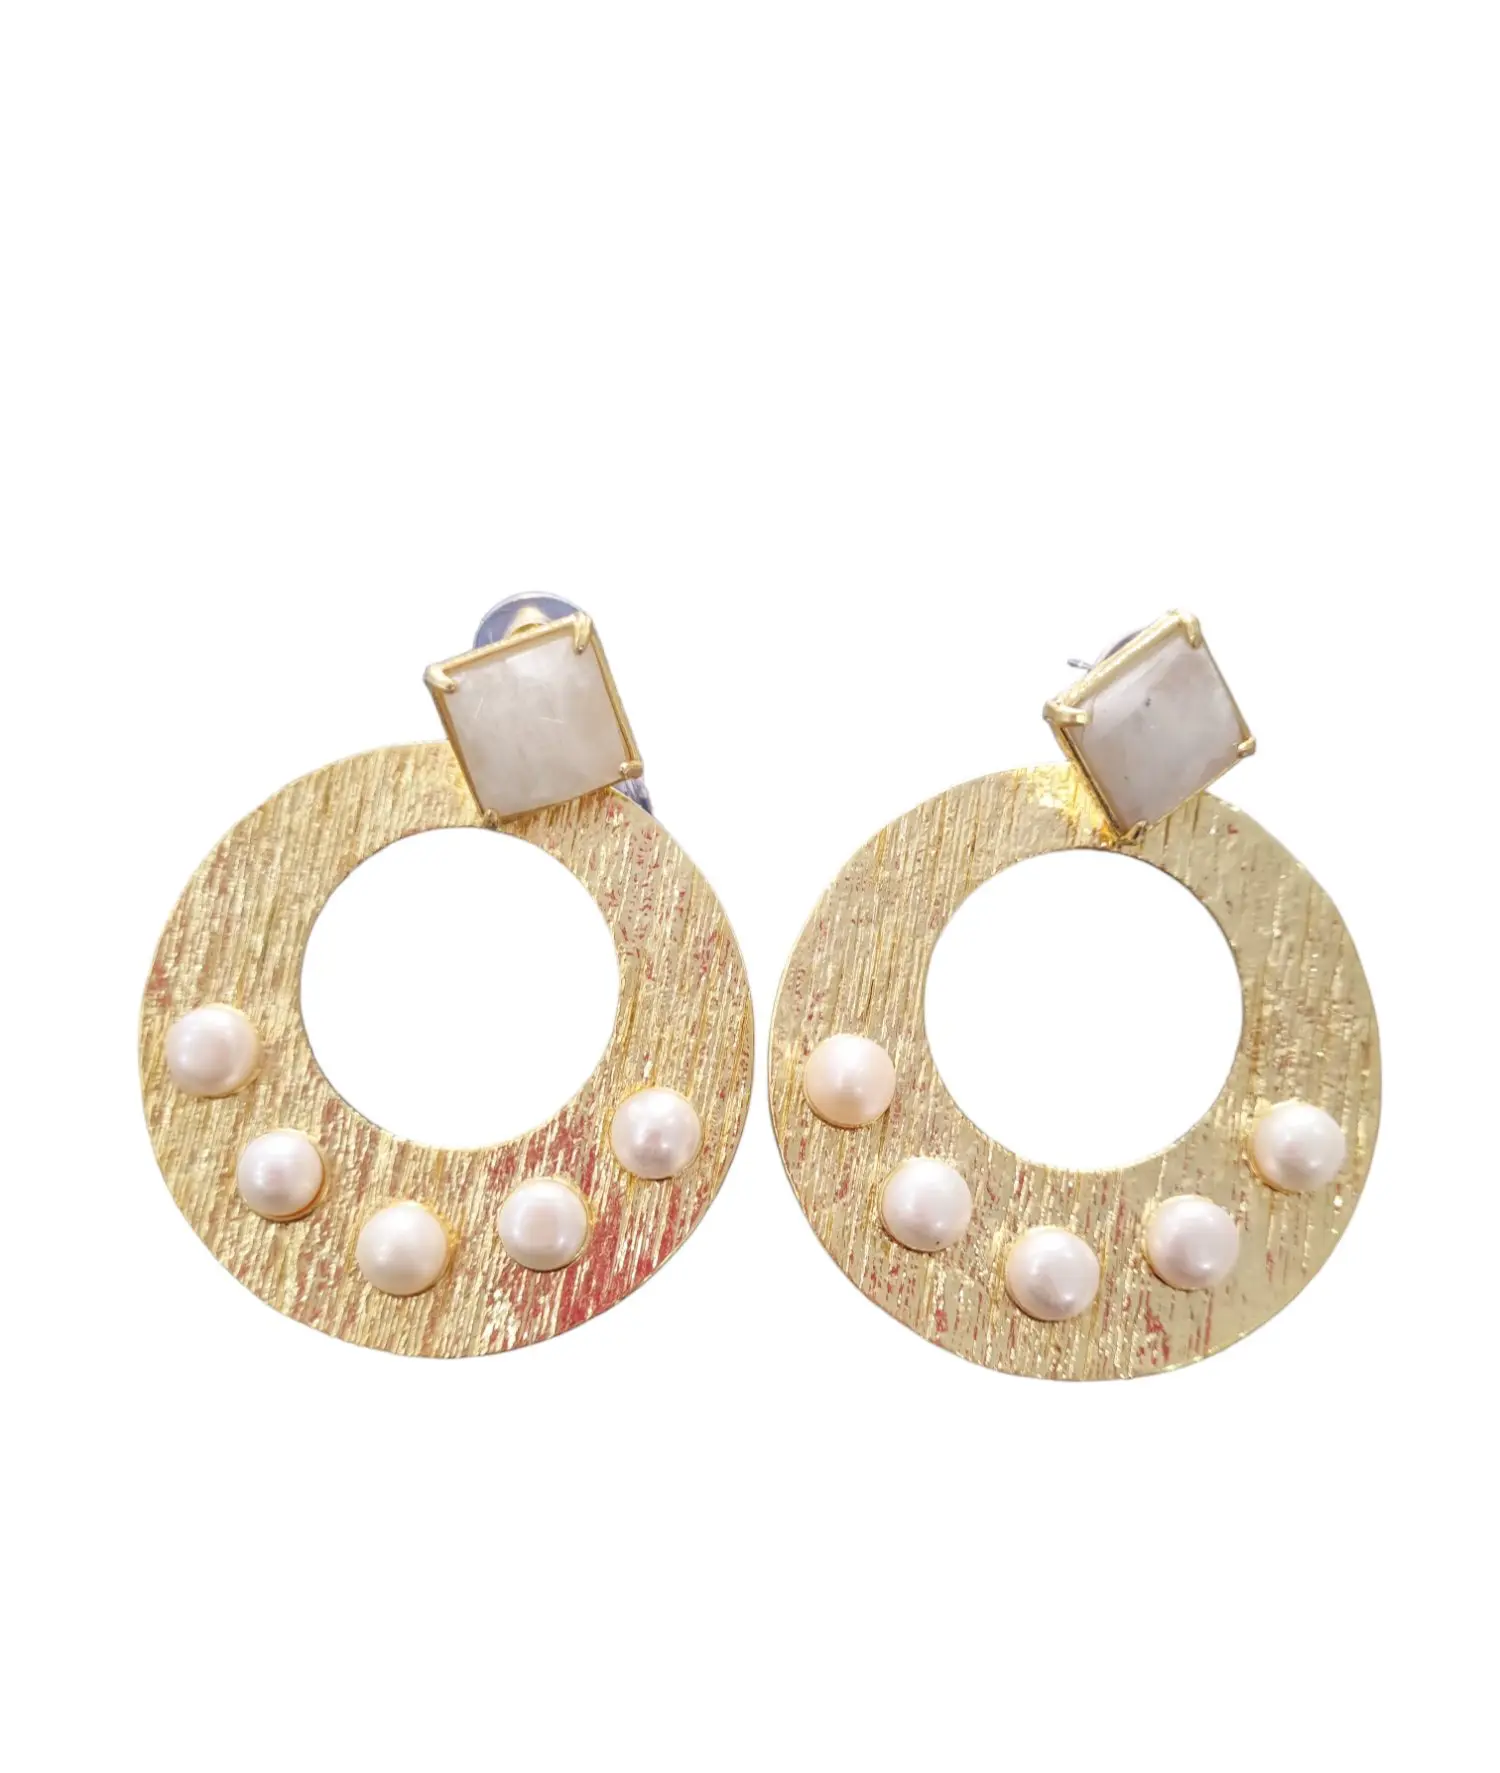 Earrings made with brass river pearls and quartz. Length 6cm weight 19.2gr